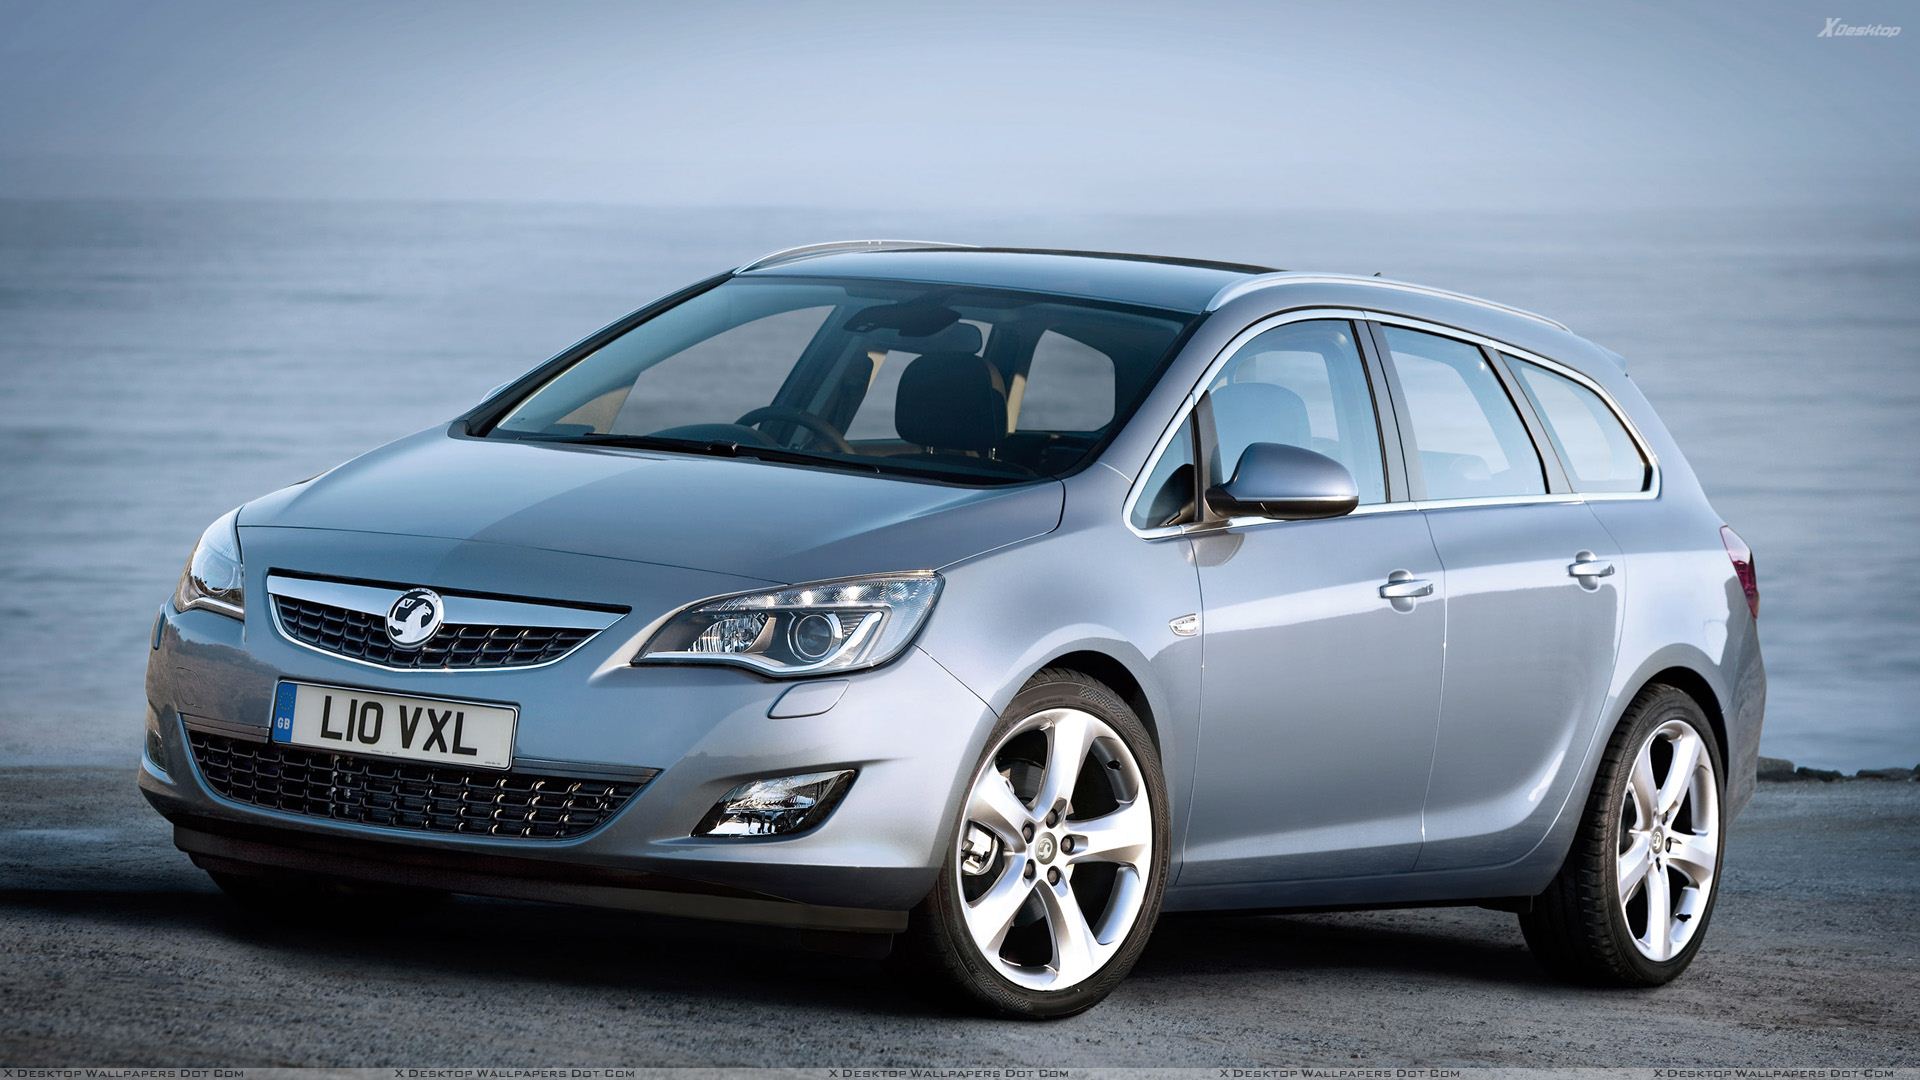 Vauxhall Astra Wallpaper Photos Image In HD